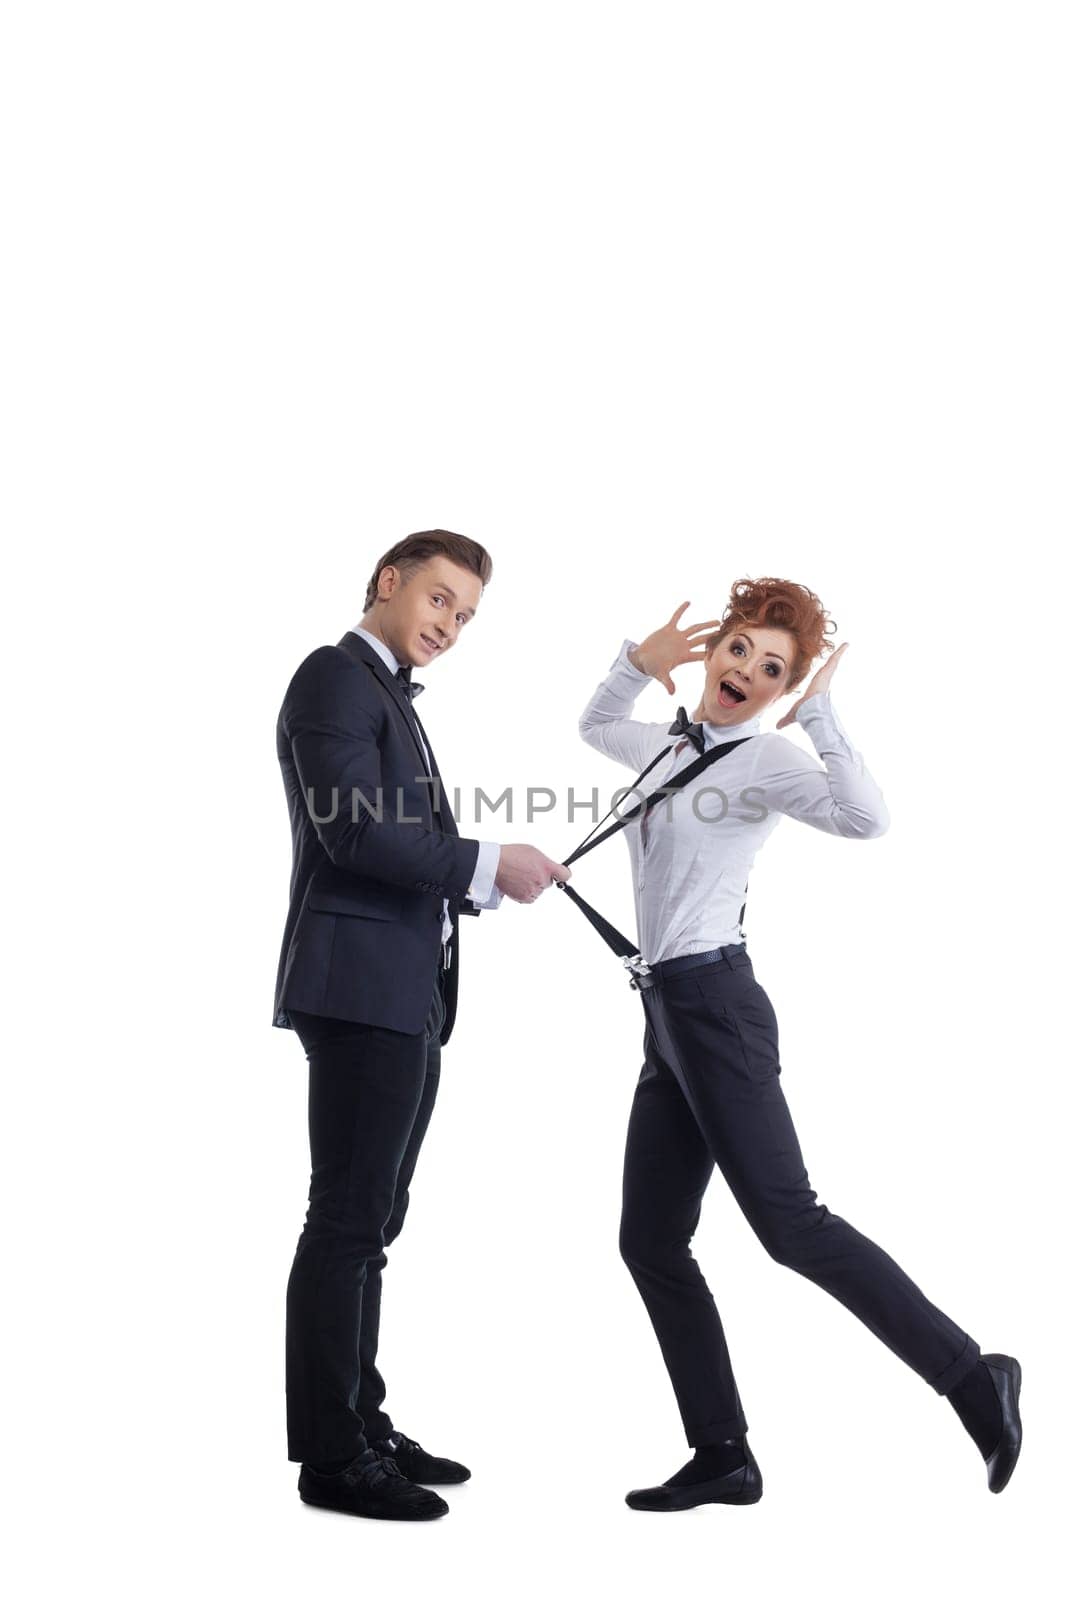 Cute man pulls girl's suspenders and she's smiling, Isolated on white background